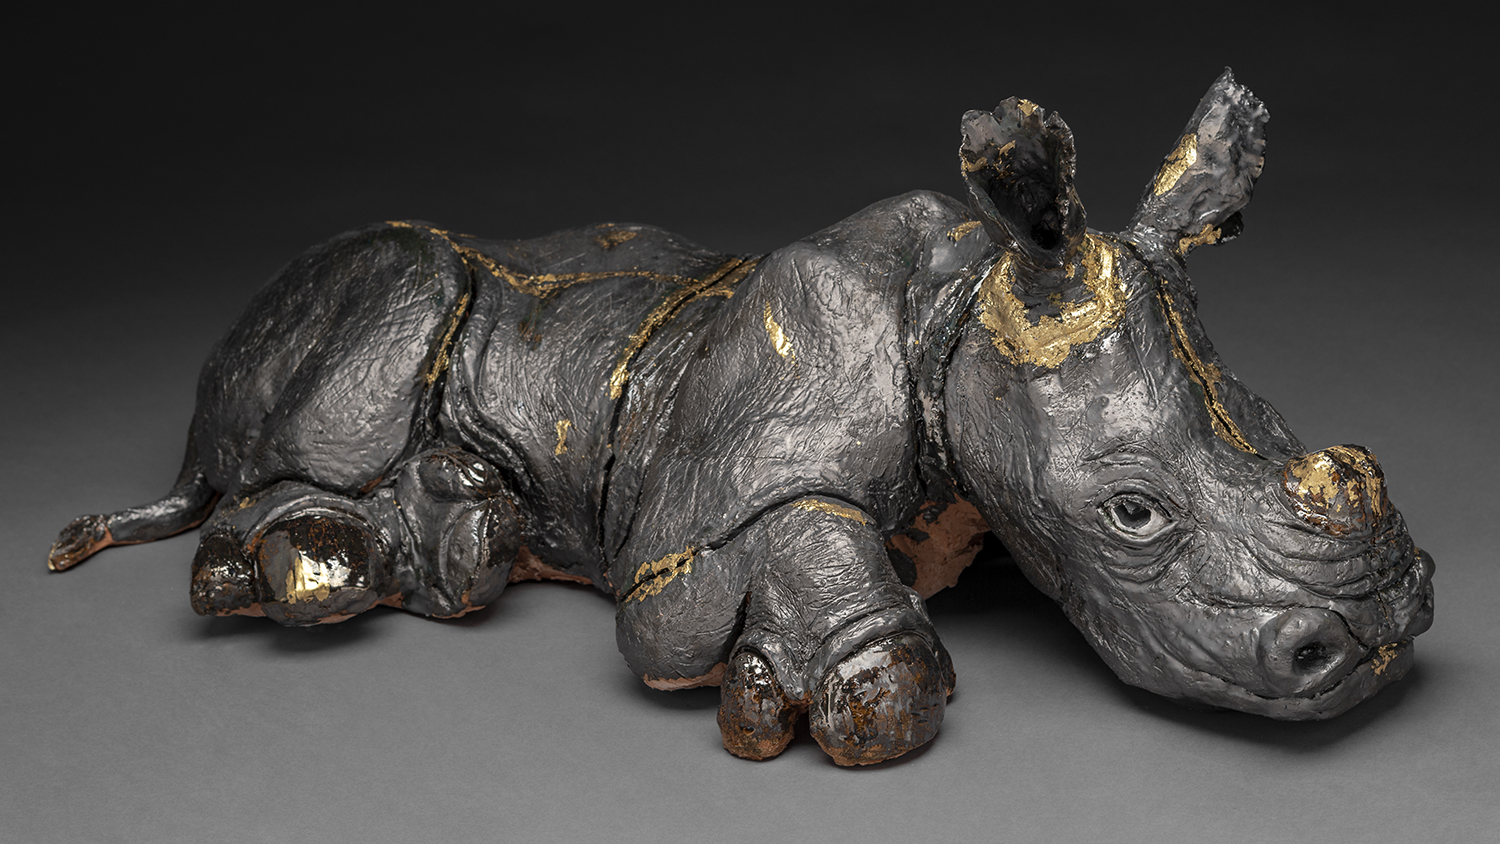 A sculpture a baby rhino laying down.